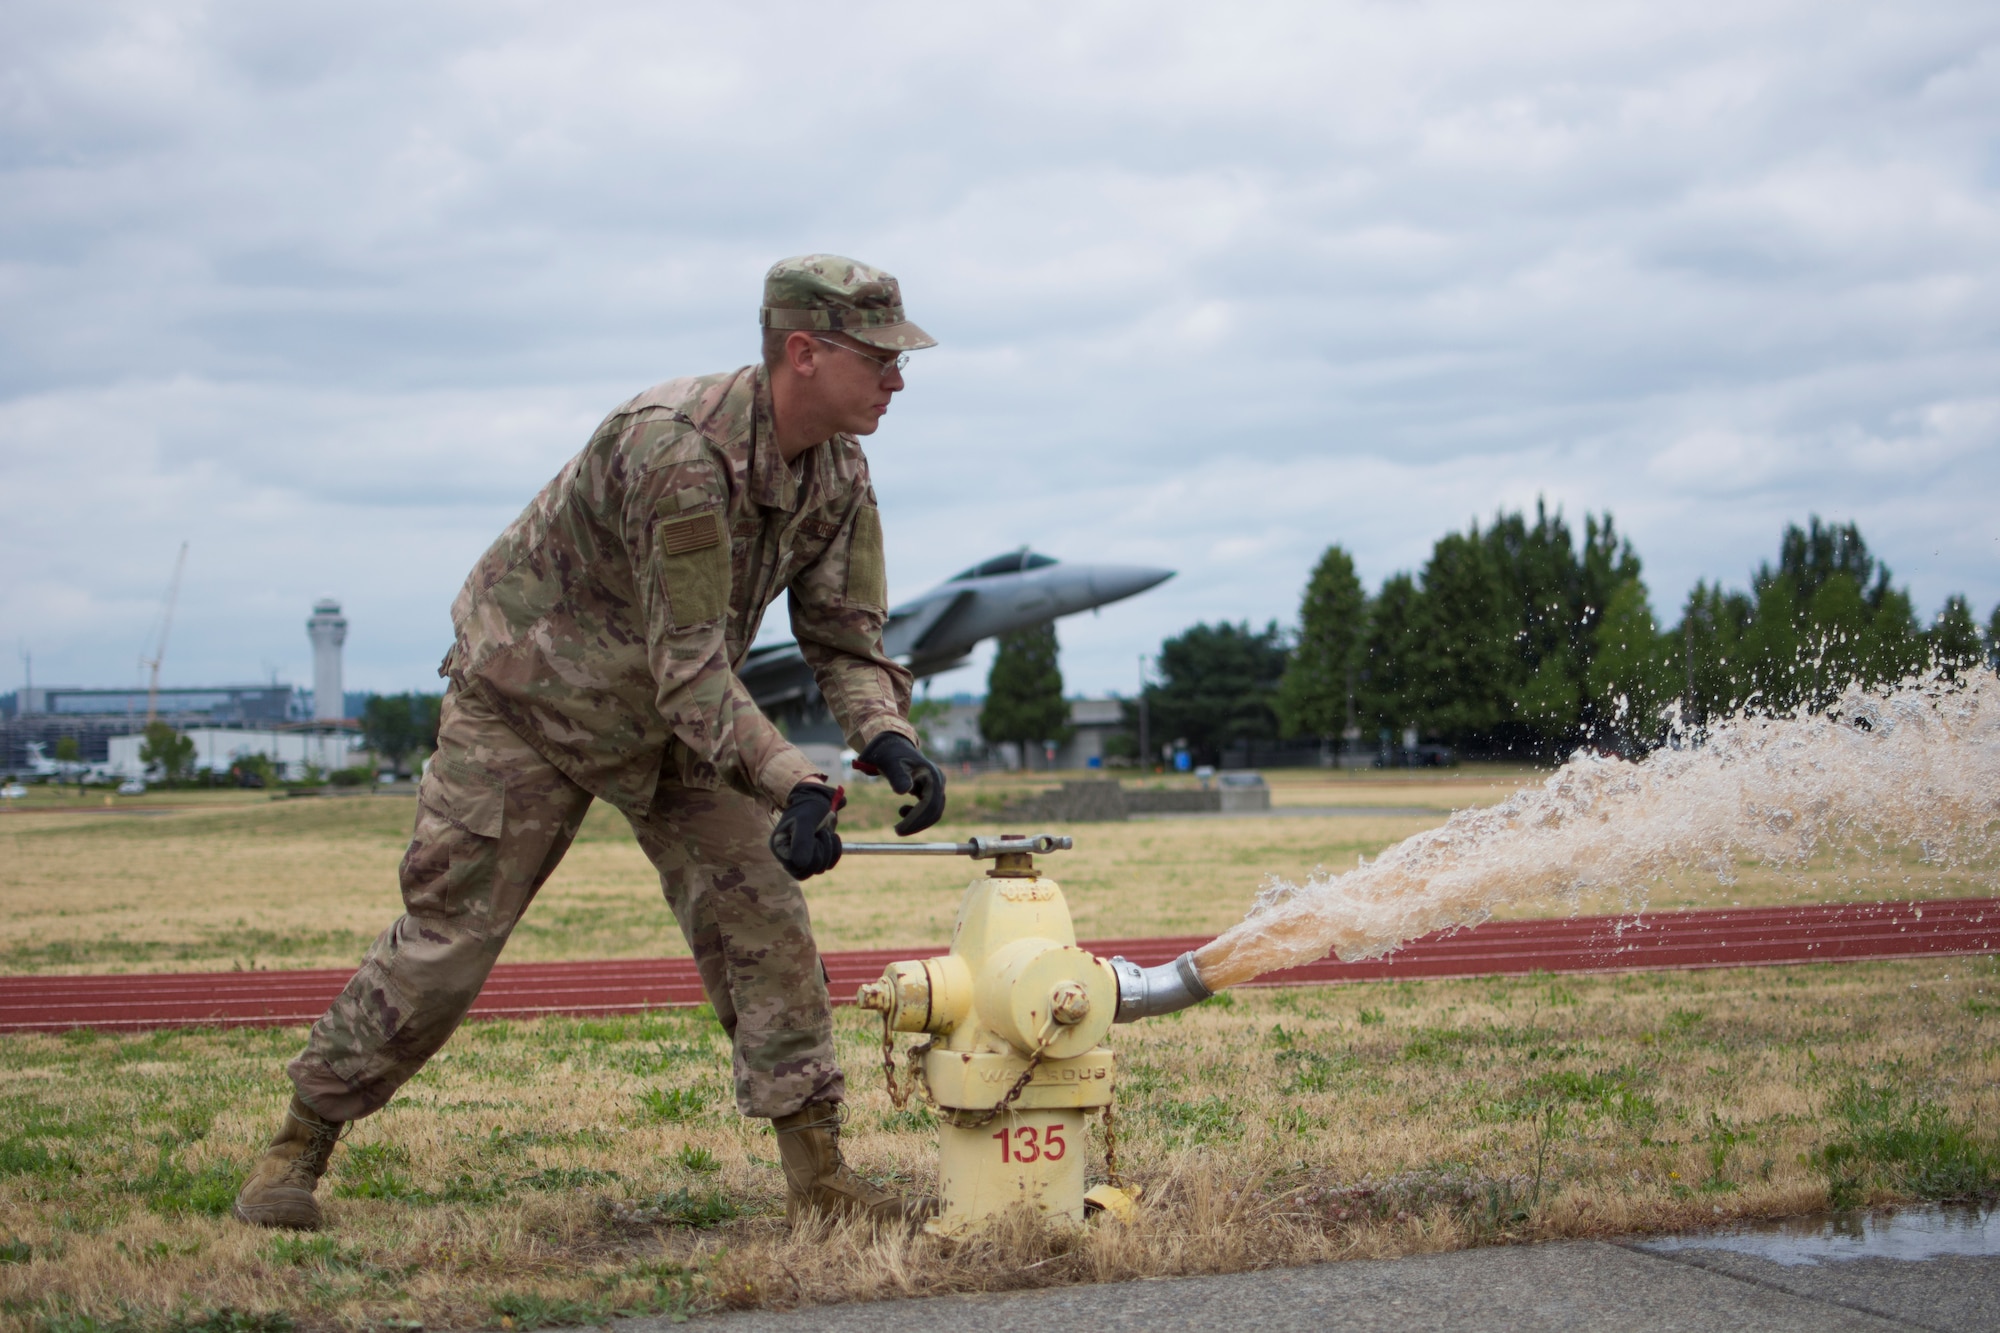 U.S. Air Force Tech. Sgt. Benjamin Schultz, a water and fuels systems maintenance craftsmen from the 142nd Civili Engineer Squadron, Oregon Air National Guard, flushes a hydrant on Portland Air National Guard Base, Ore., July 2, 2020. 
Schultz was selected as the Air National Guard 2020 Outstanding Noncommissioned Officer of the Year. (U.S. Air National Guard photo by Tech. Sgt. Steph Sawyer)